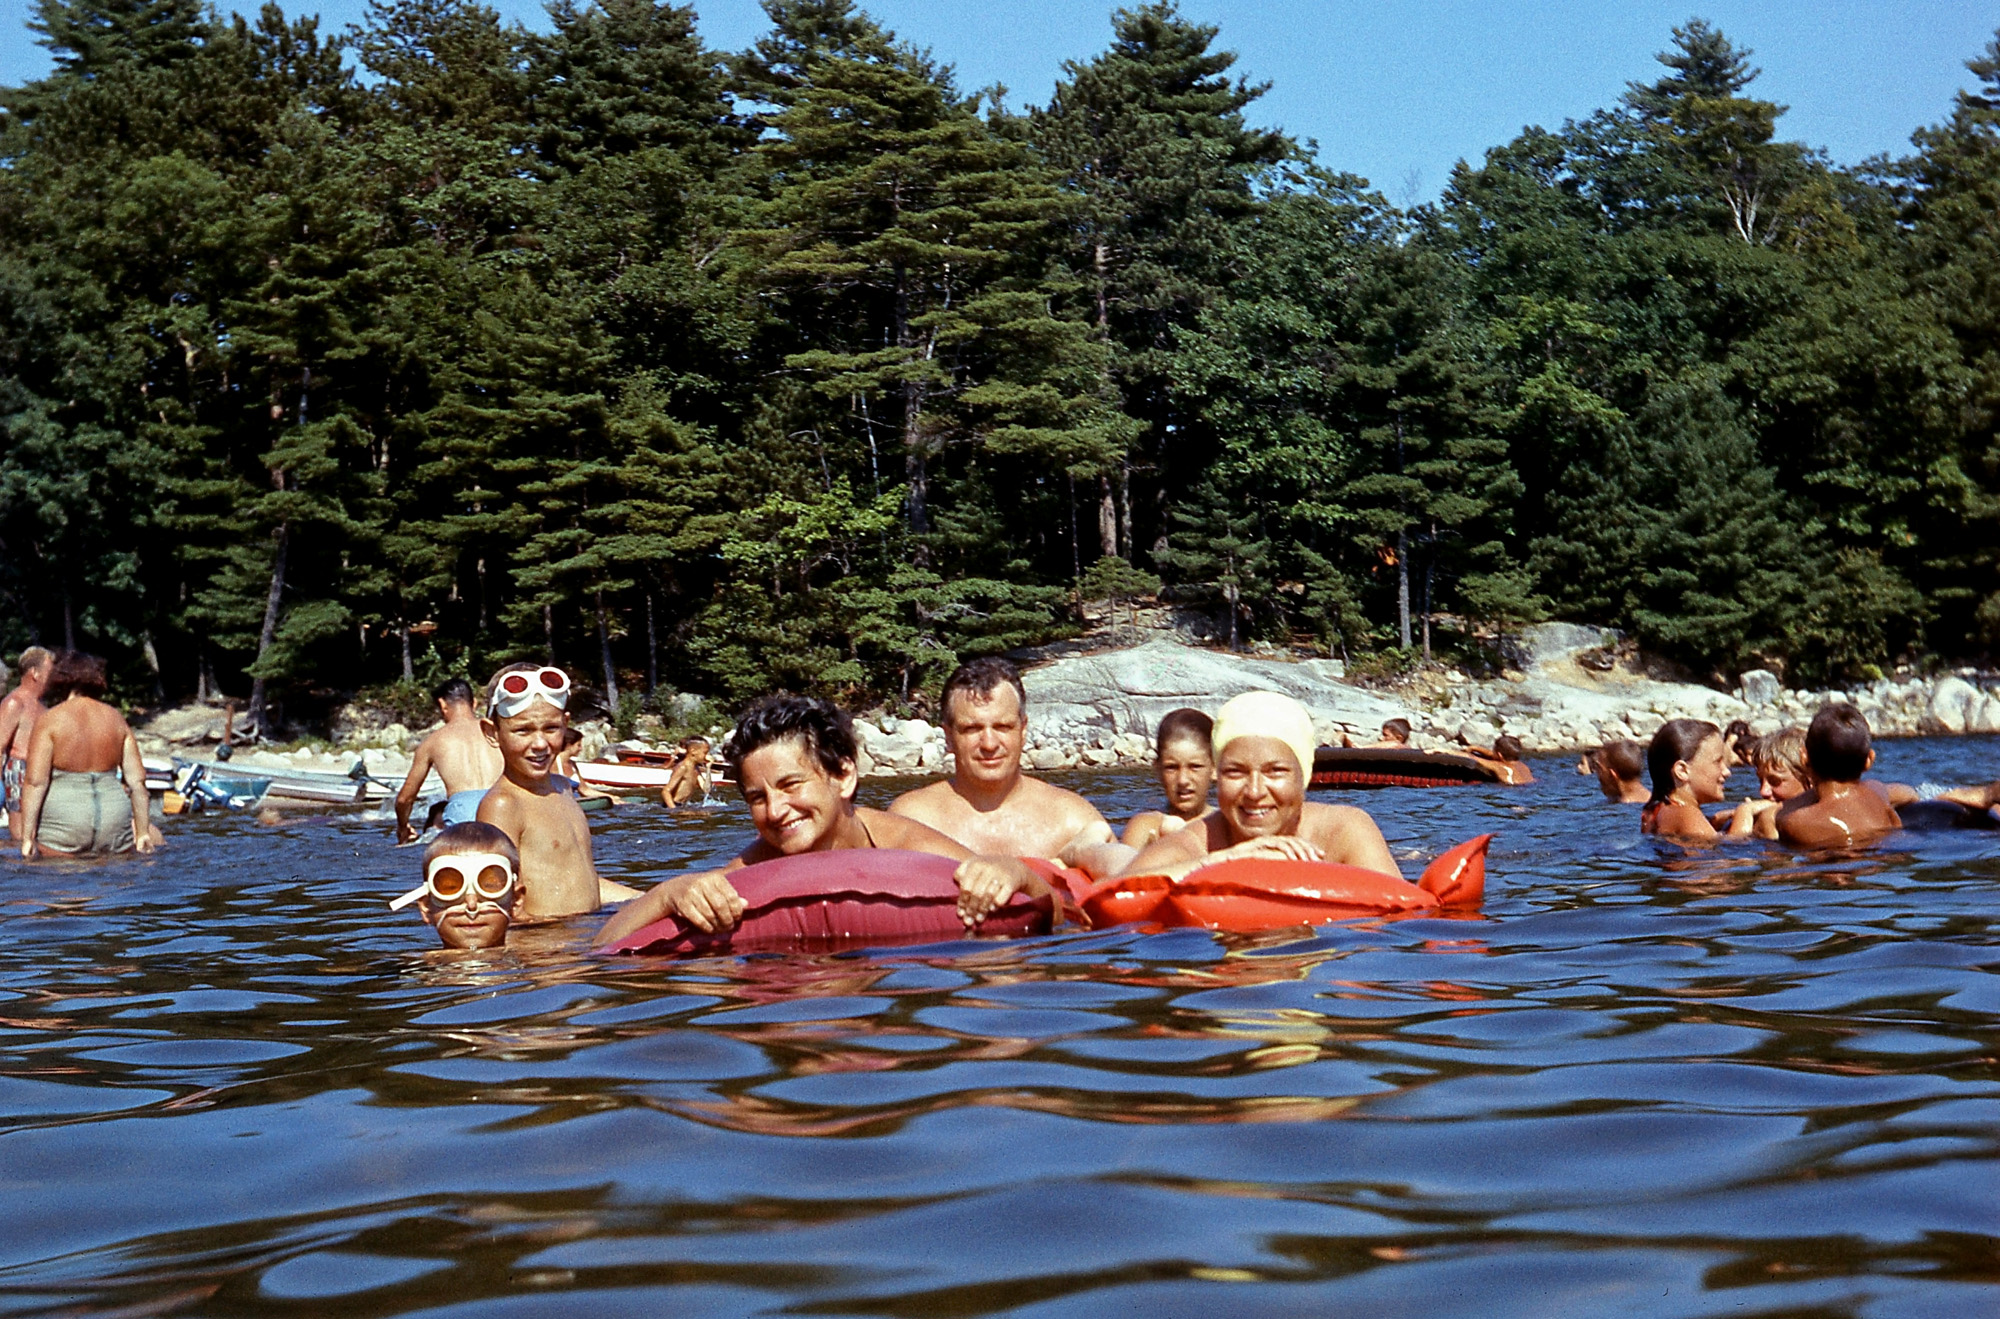 Sebago Lake, Maine, 1959. Dad ventured up to his chest with his Yashicaflex camera to capture this shot, Mom on the right, my brother with the nose plugs on the left, and friends met at the campground. This trial camping trip led to Dad buying a 9x12 high-side center ridge pole cotton tent and other equipment to go camping well into the 1960s. View full size.